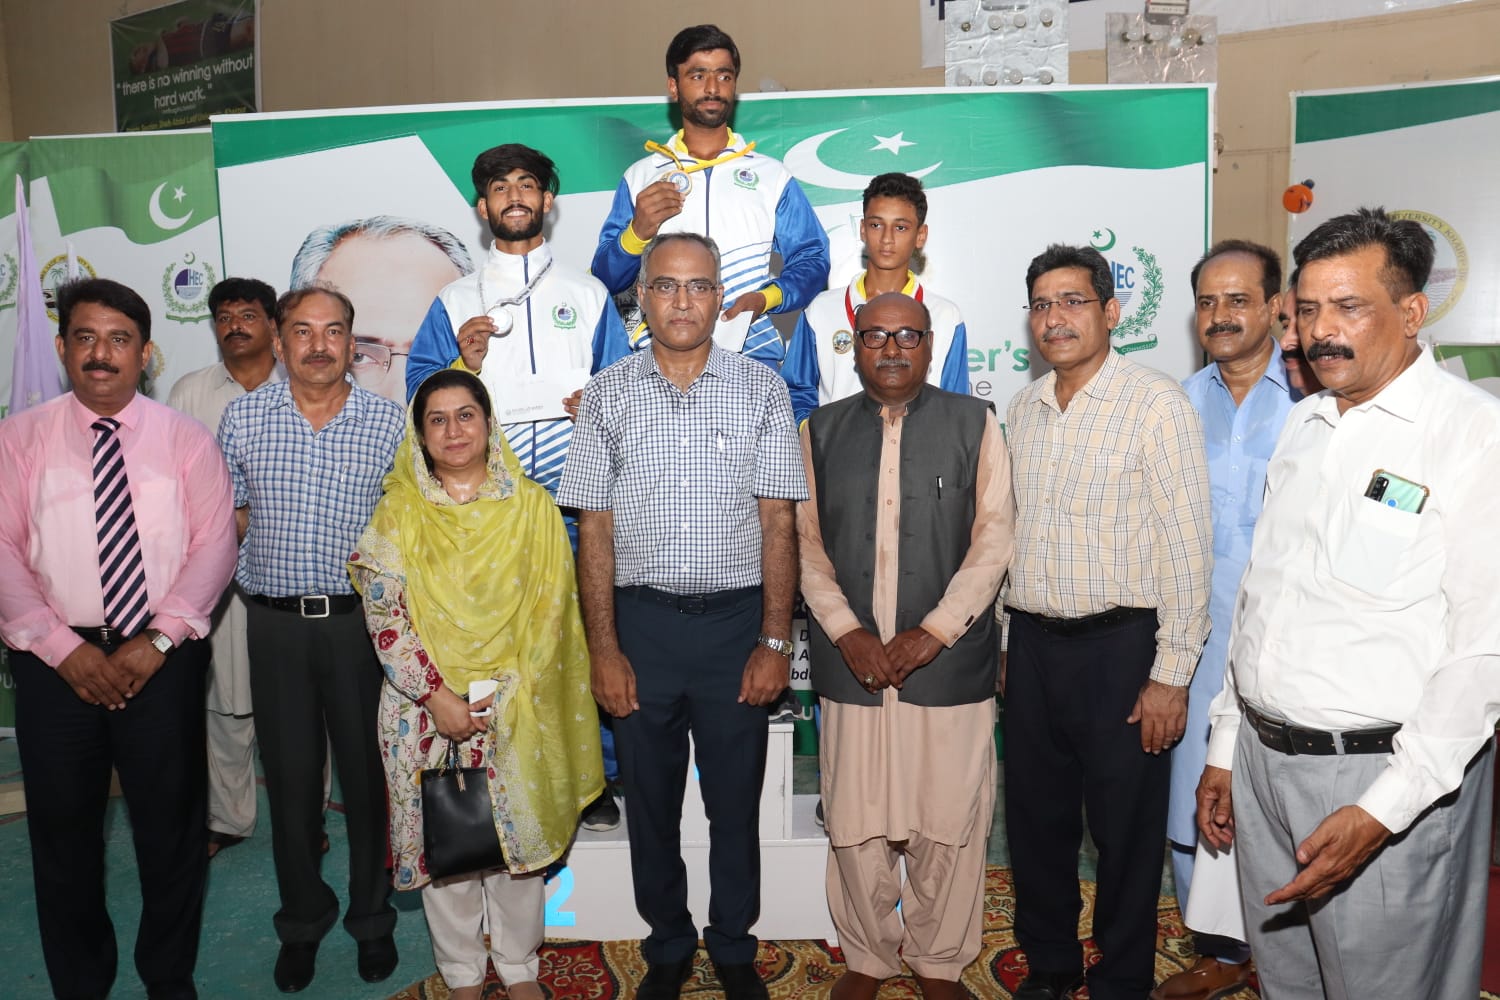 Prime Minister's Youth Programme in collaboration with Shah Abdul Latif Bhitai University Khairpur organised the closing ceremony of weightlifting talent hunt league. Deputy Comissioner Khairpur Saifullah Abroo attended the event as Chief Guest.